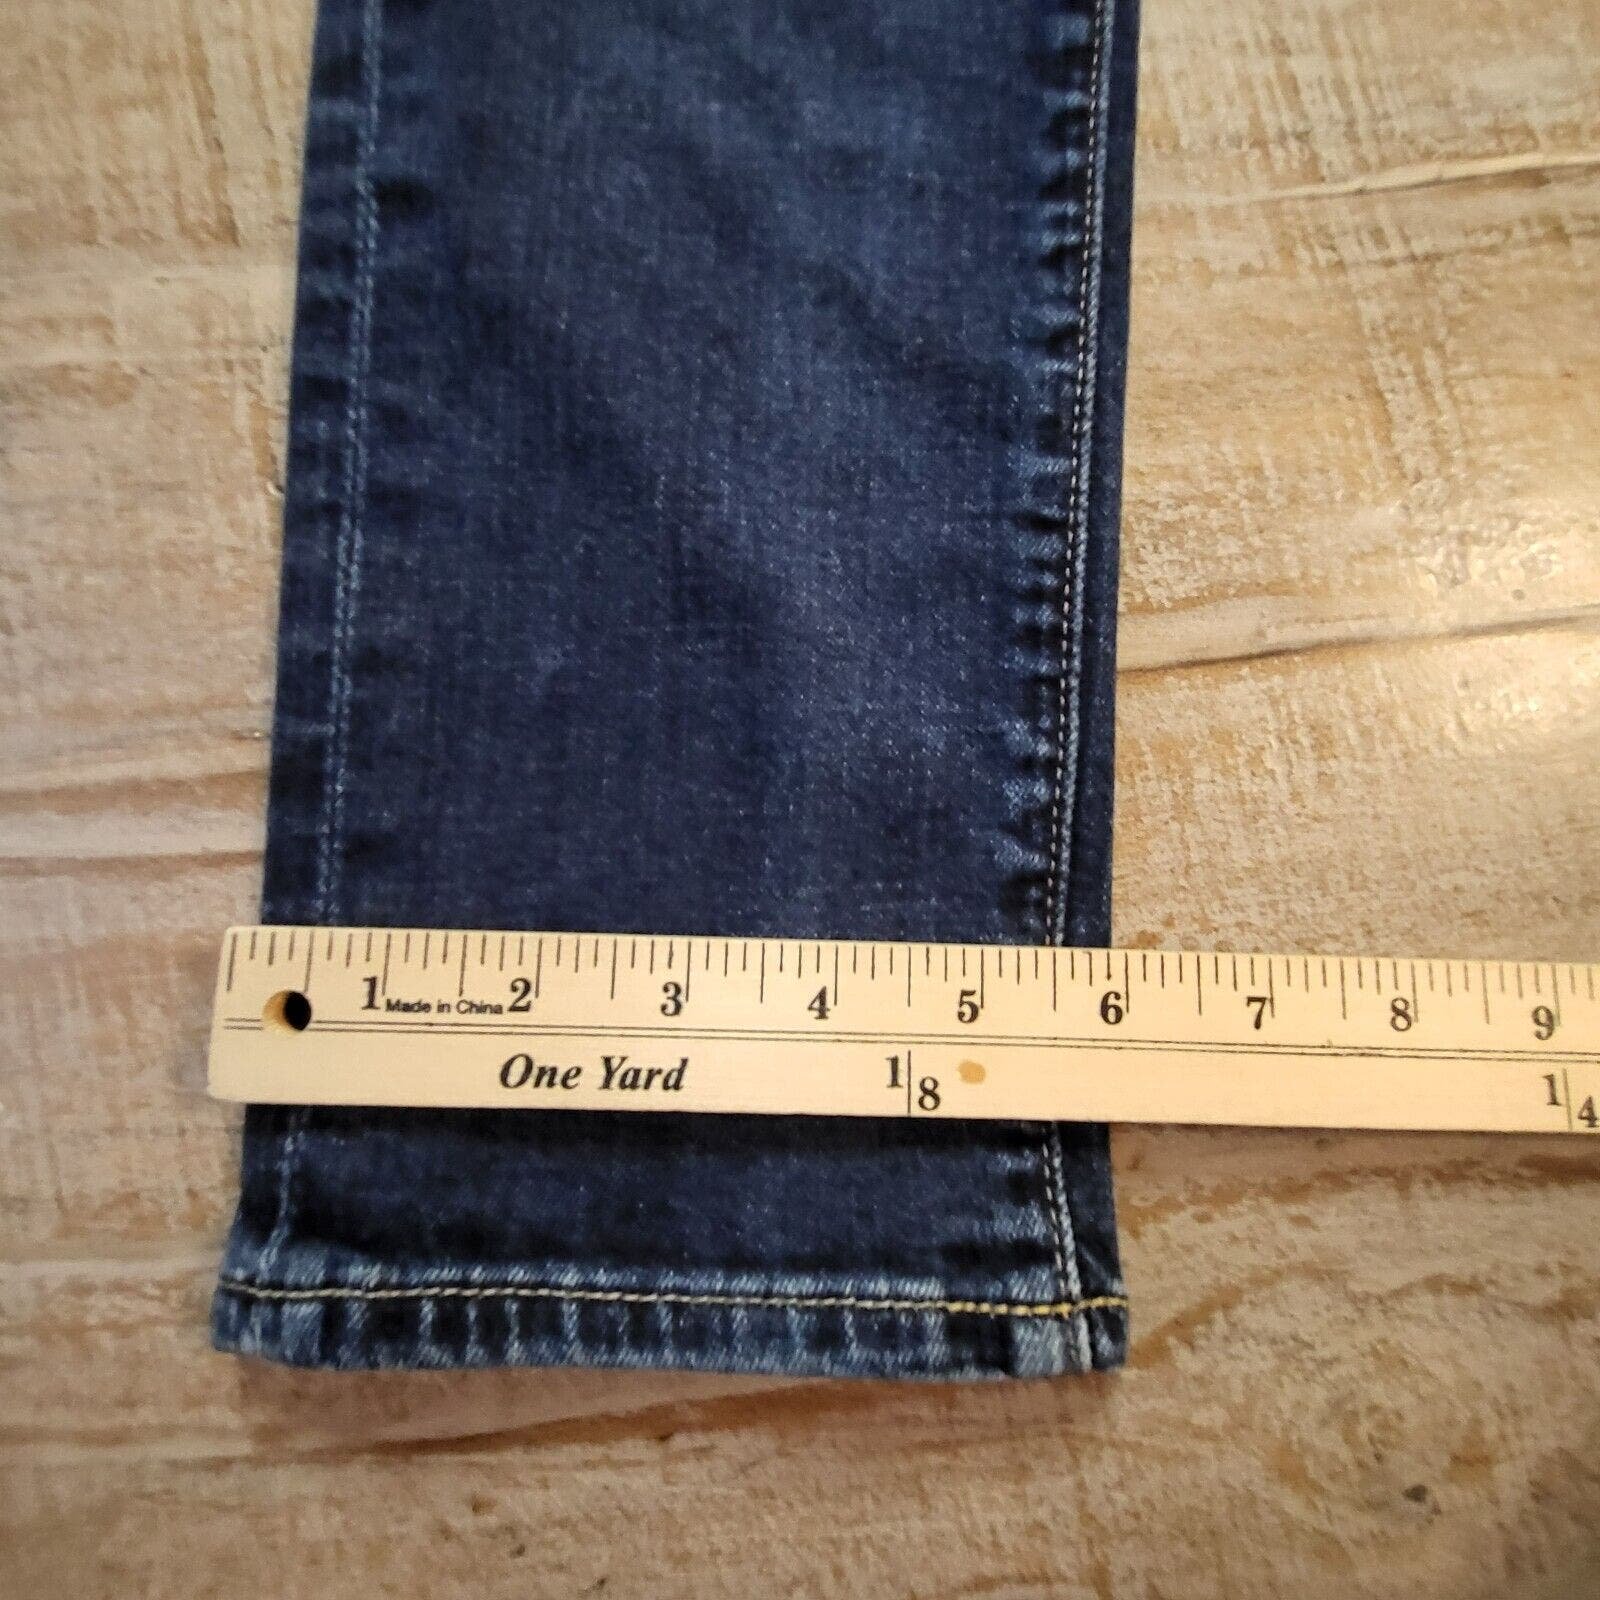 Simple ABERCROMBIE & FITCH Jeans Womens 28 Stretch Pants Medium Wash Blue mXSdUUwmT Factory Price